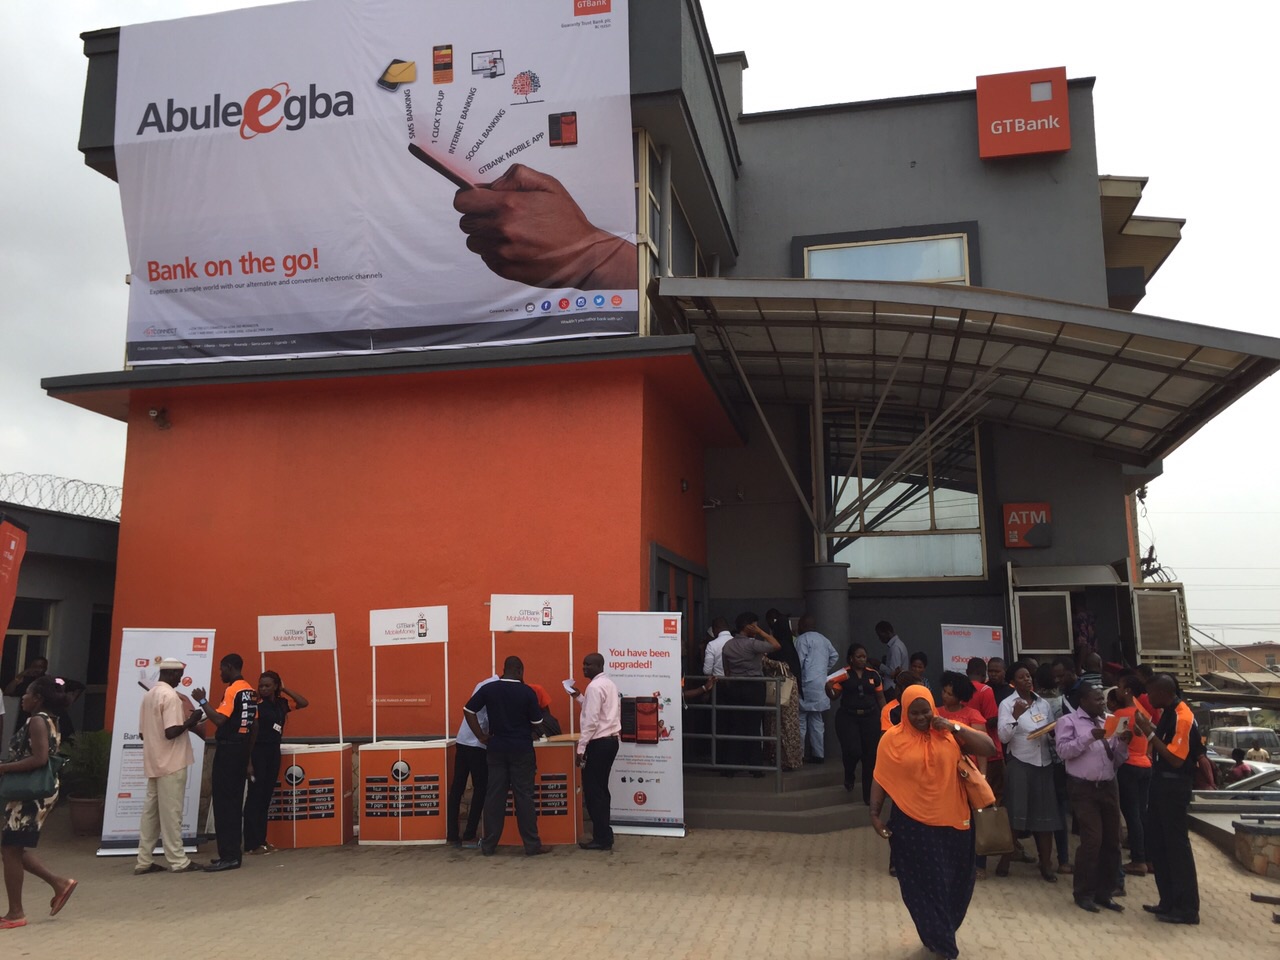 GT Bank's fintech ambitions could lead to a billion-dollar IPO